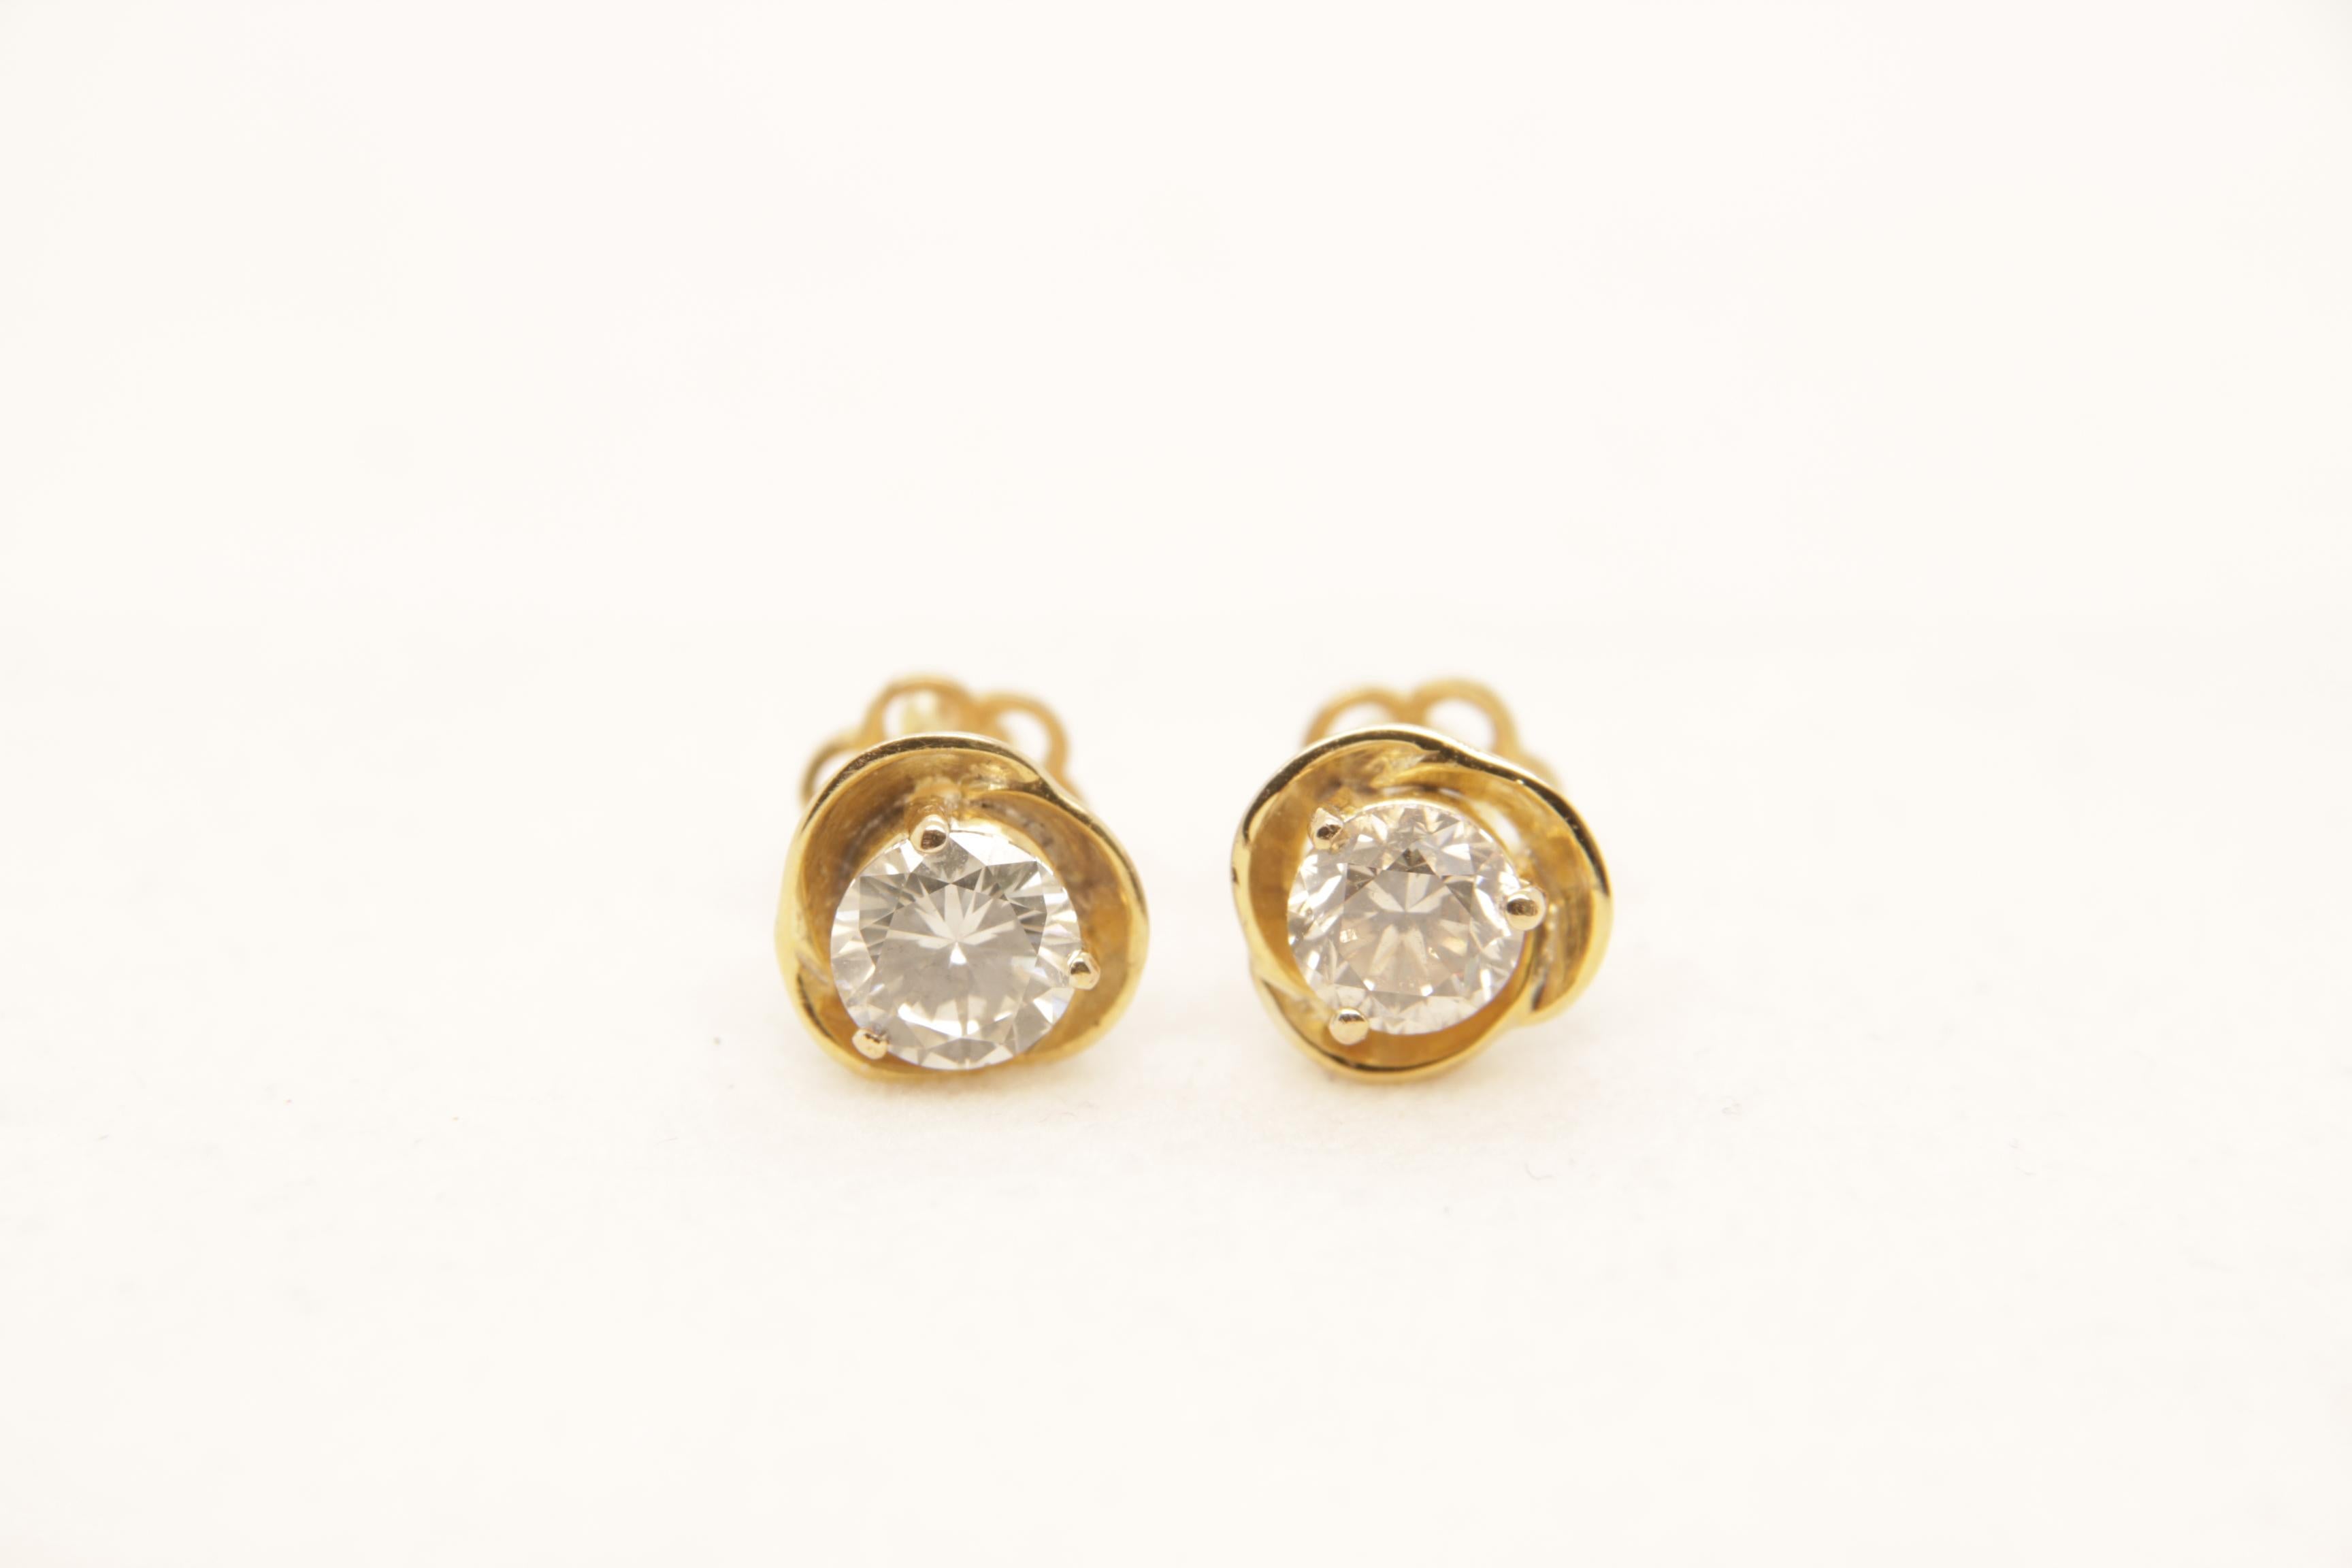 A brand new diamond earring in 18 karat gold. The two diamond weight is 2.14 carats and total earring weight is 3.57 grams.